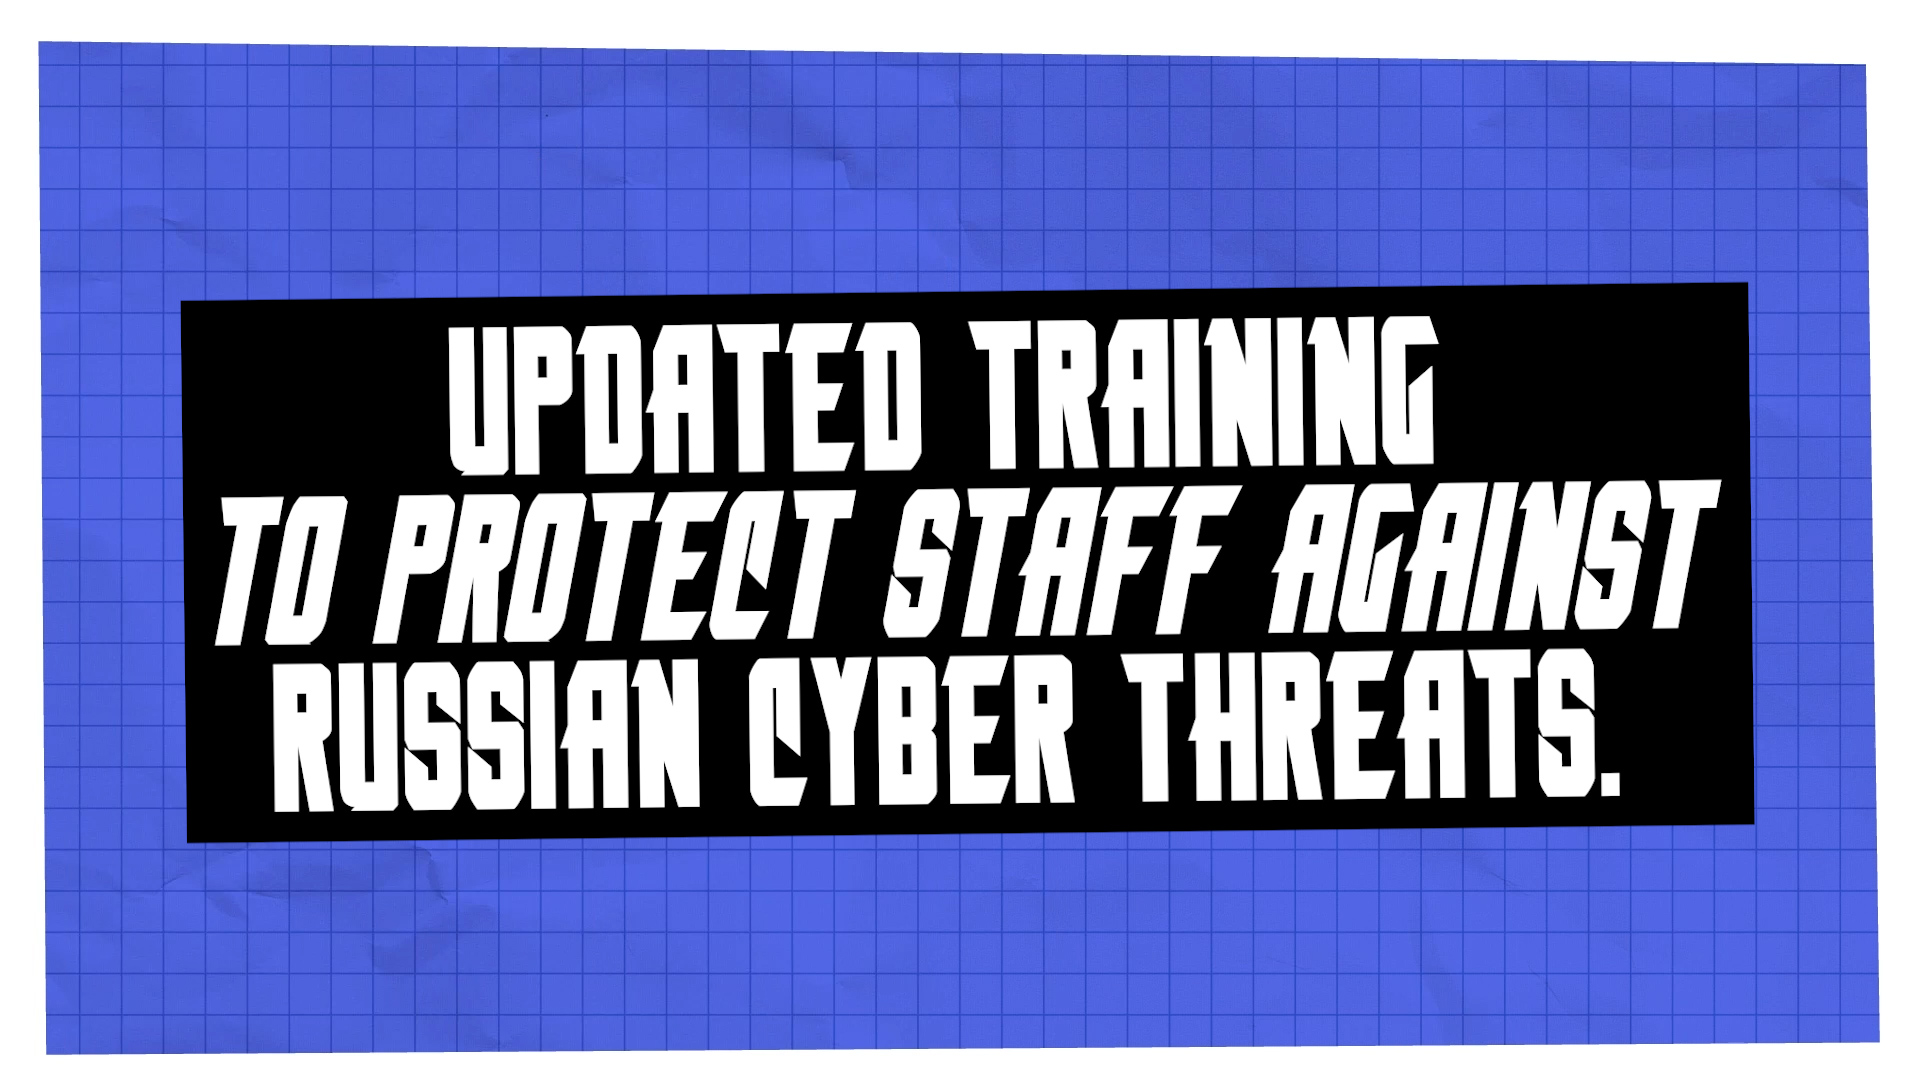 MetaCompliance Release New eLearning Series to Remediate Risk of Russian Cyber Attacks 